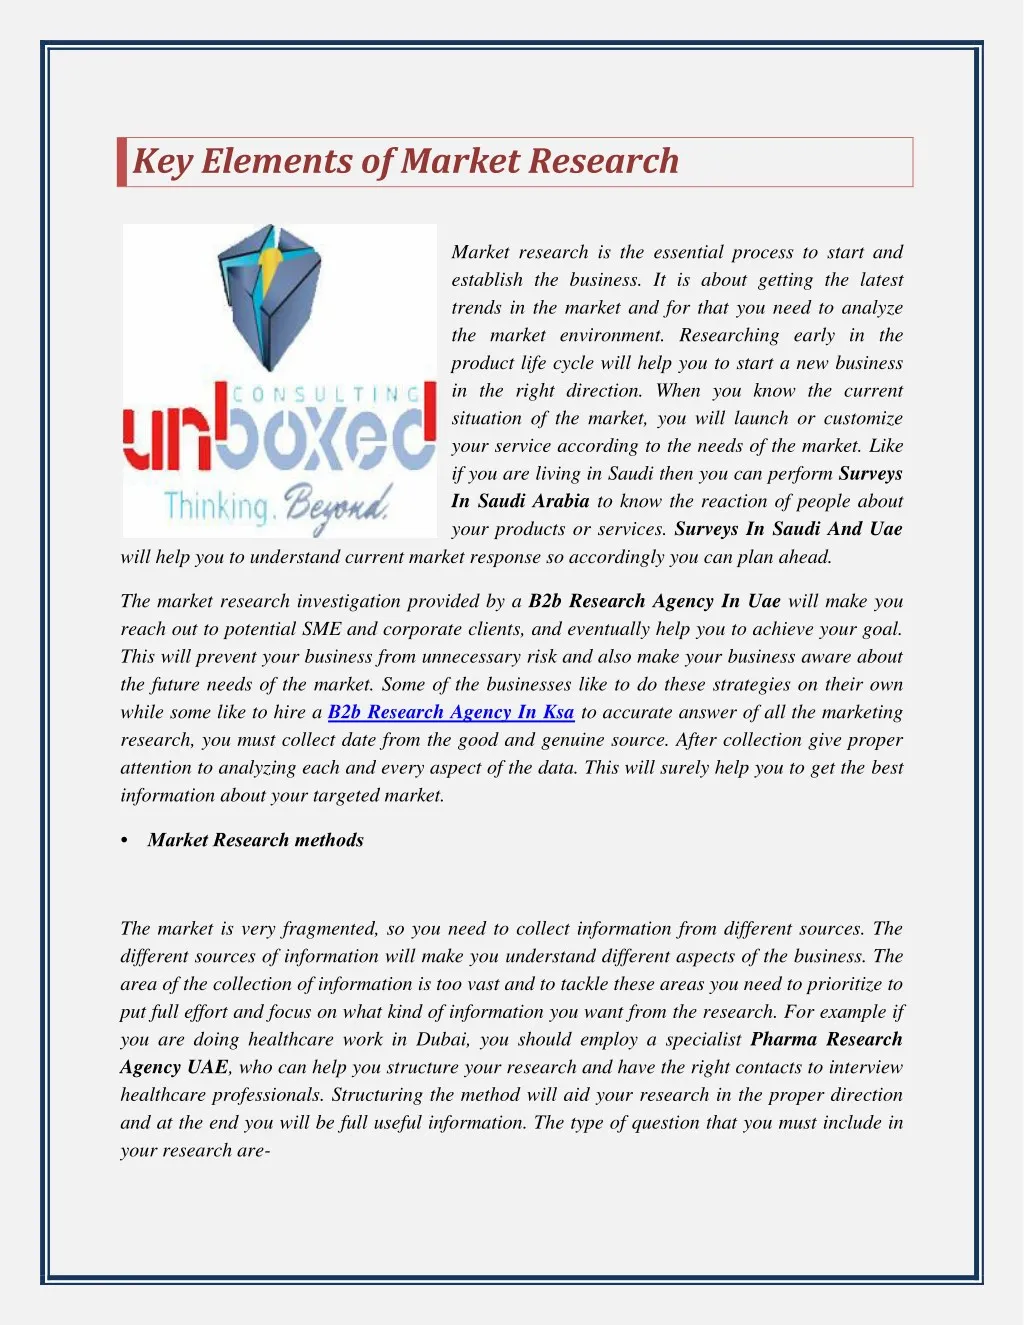 key elements of market research